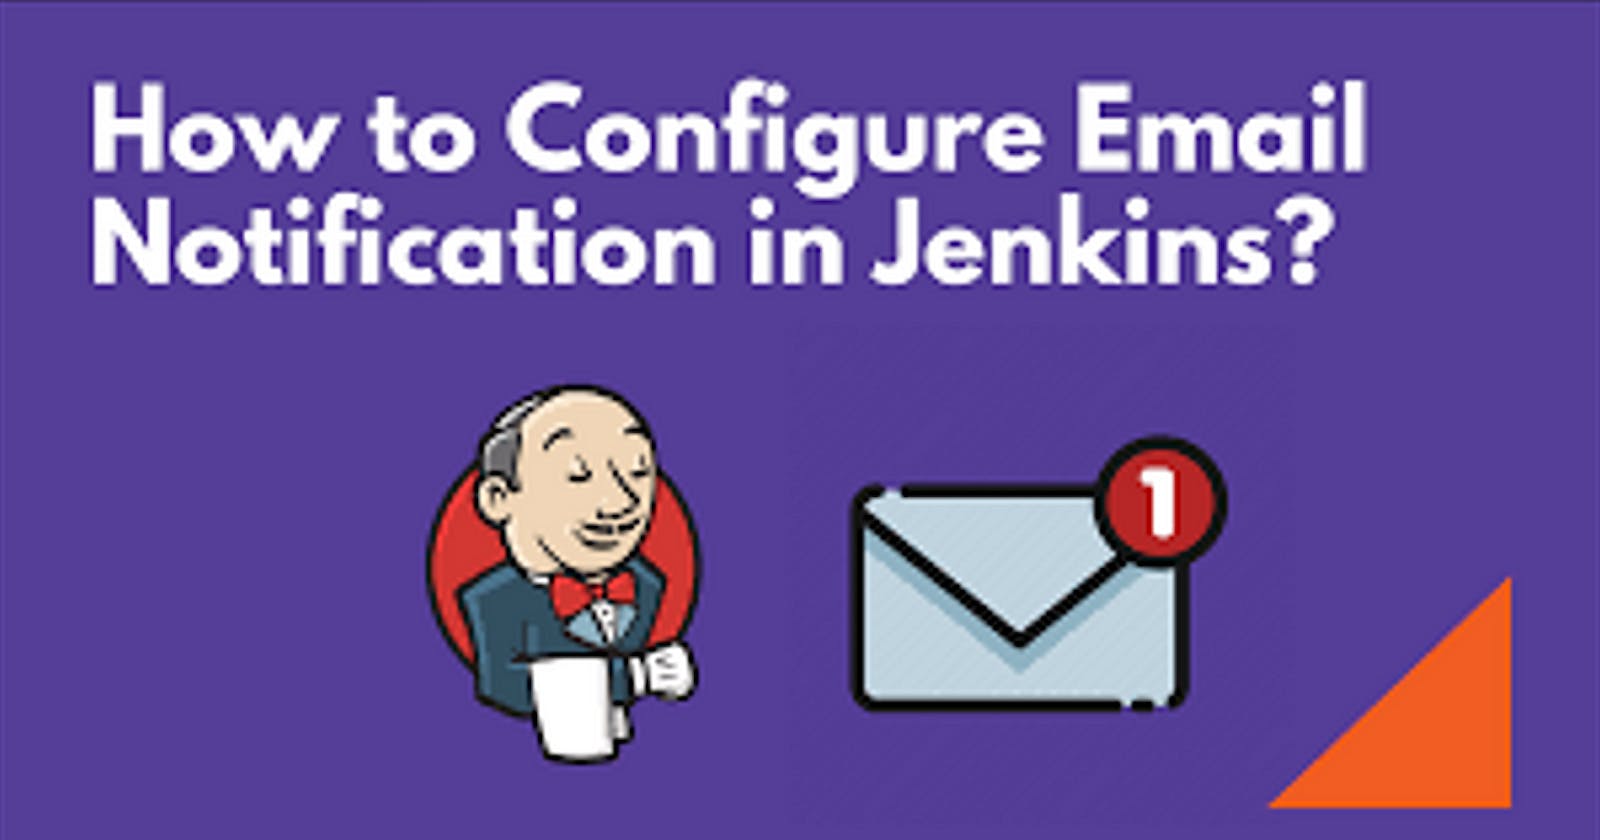 Create a Jenkins job to send email